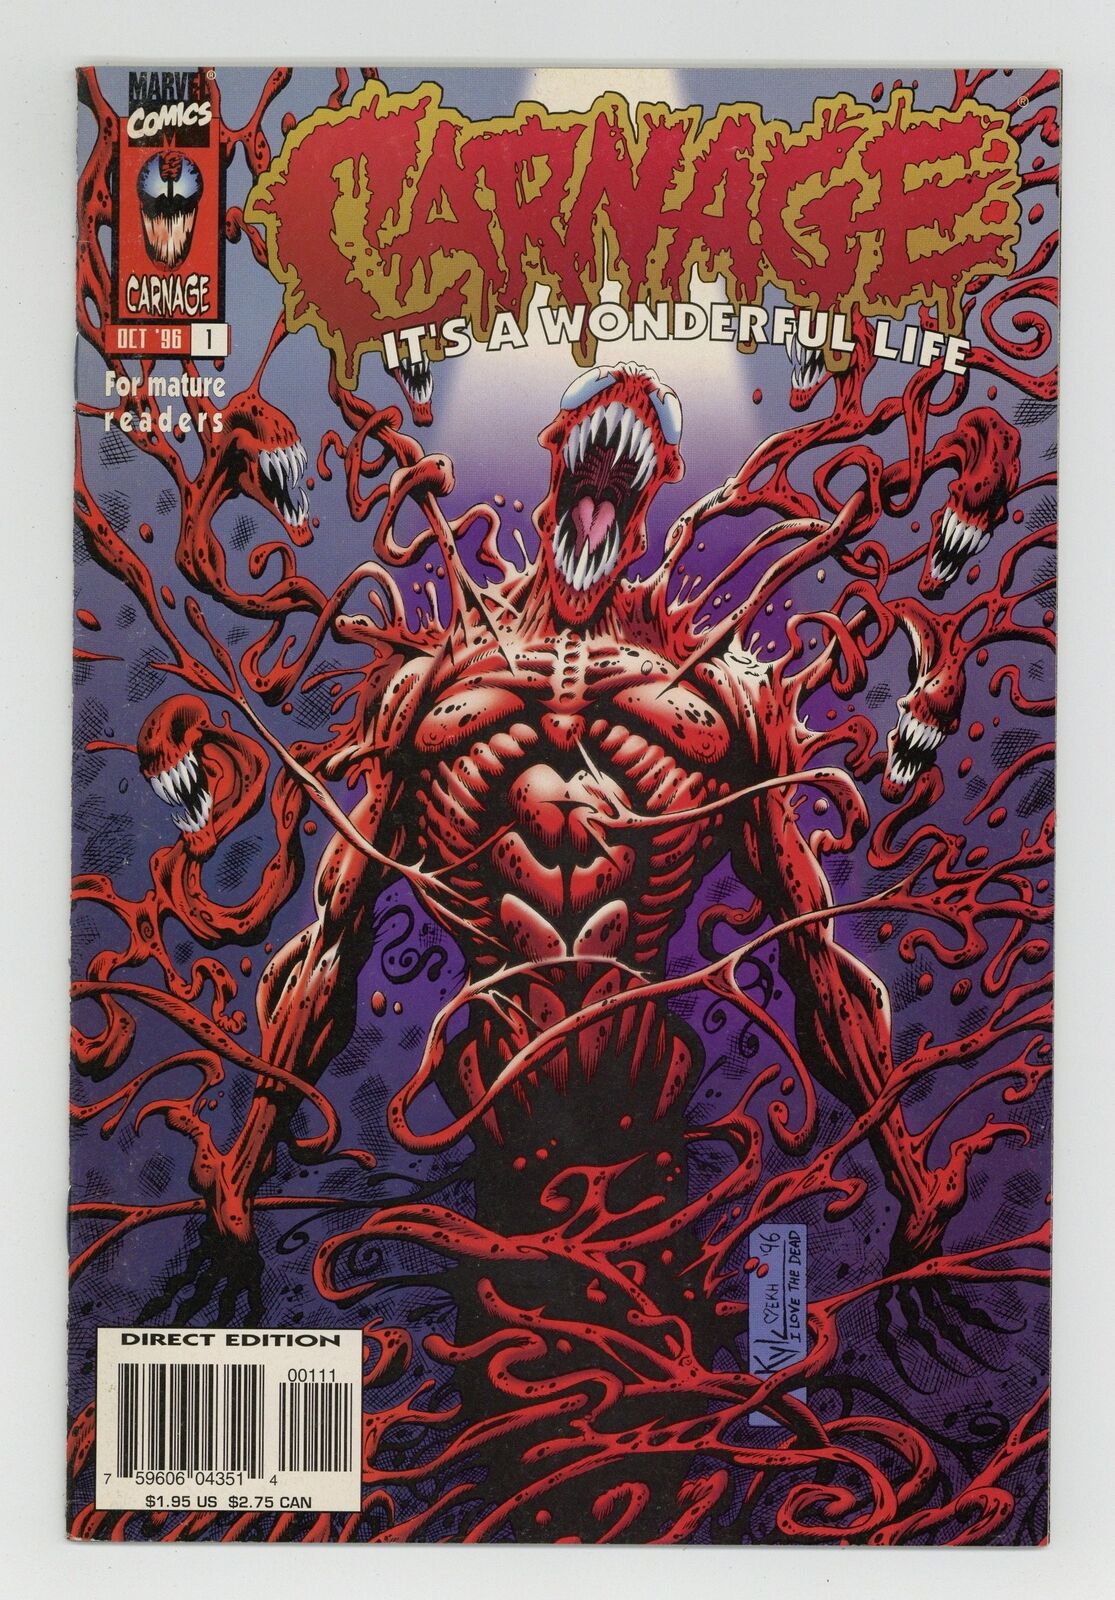 Carnage It's a Wonderful Life #1 FN 6.0 1996